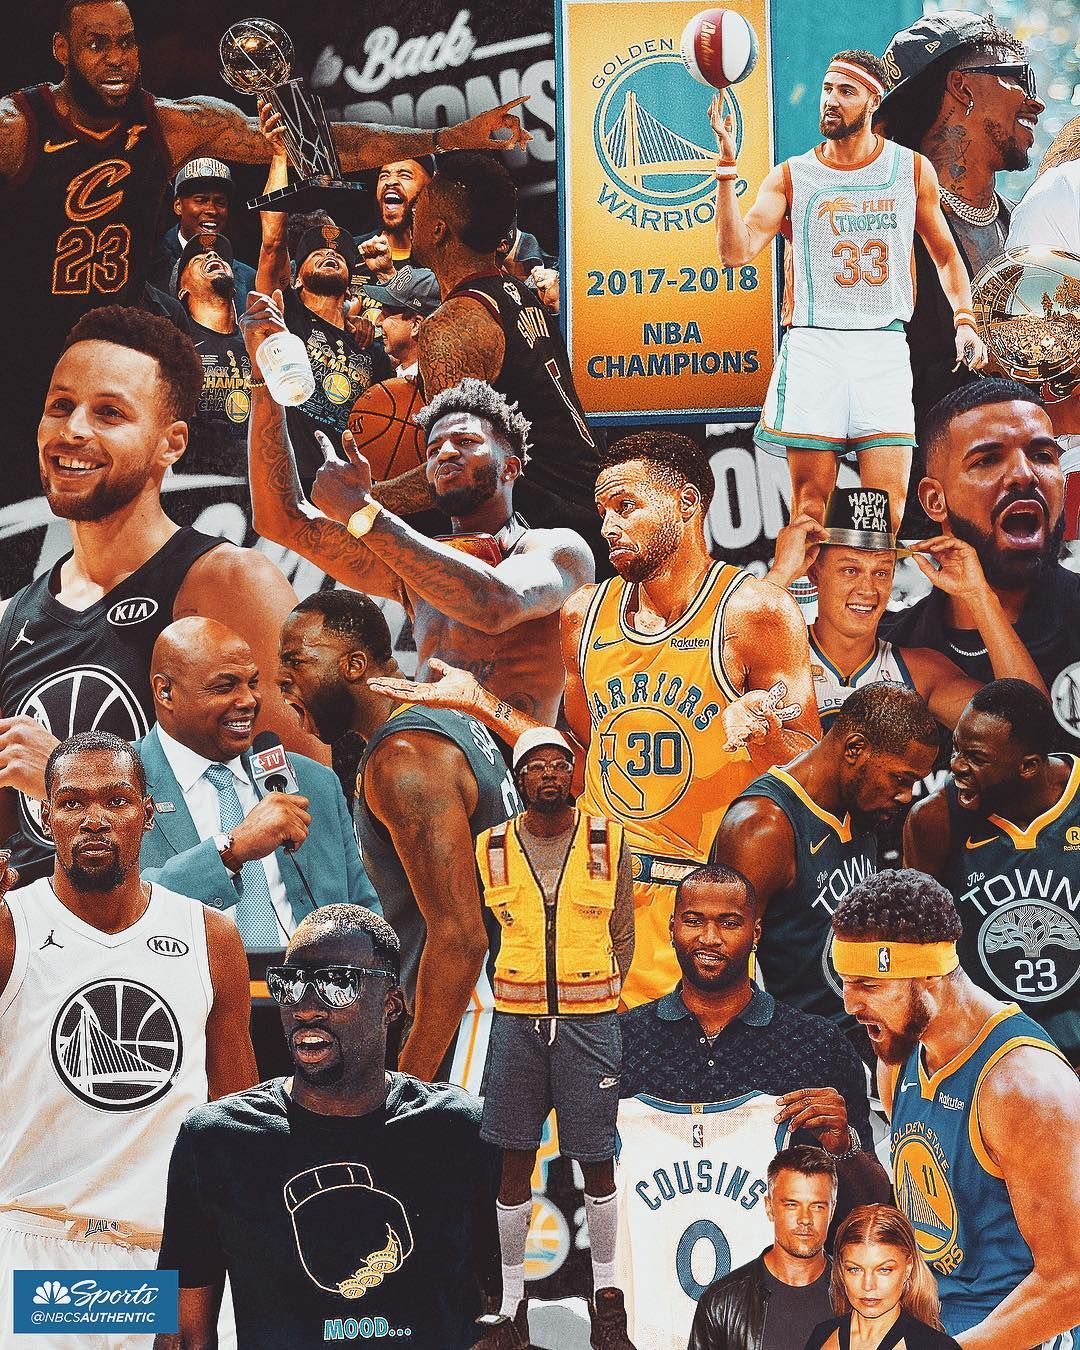 Collage of Golden state warriors players and their championships - Kobe Bryant